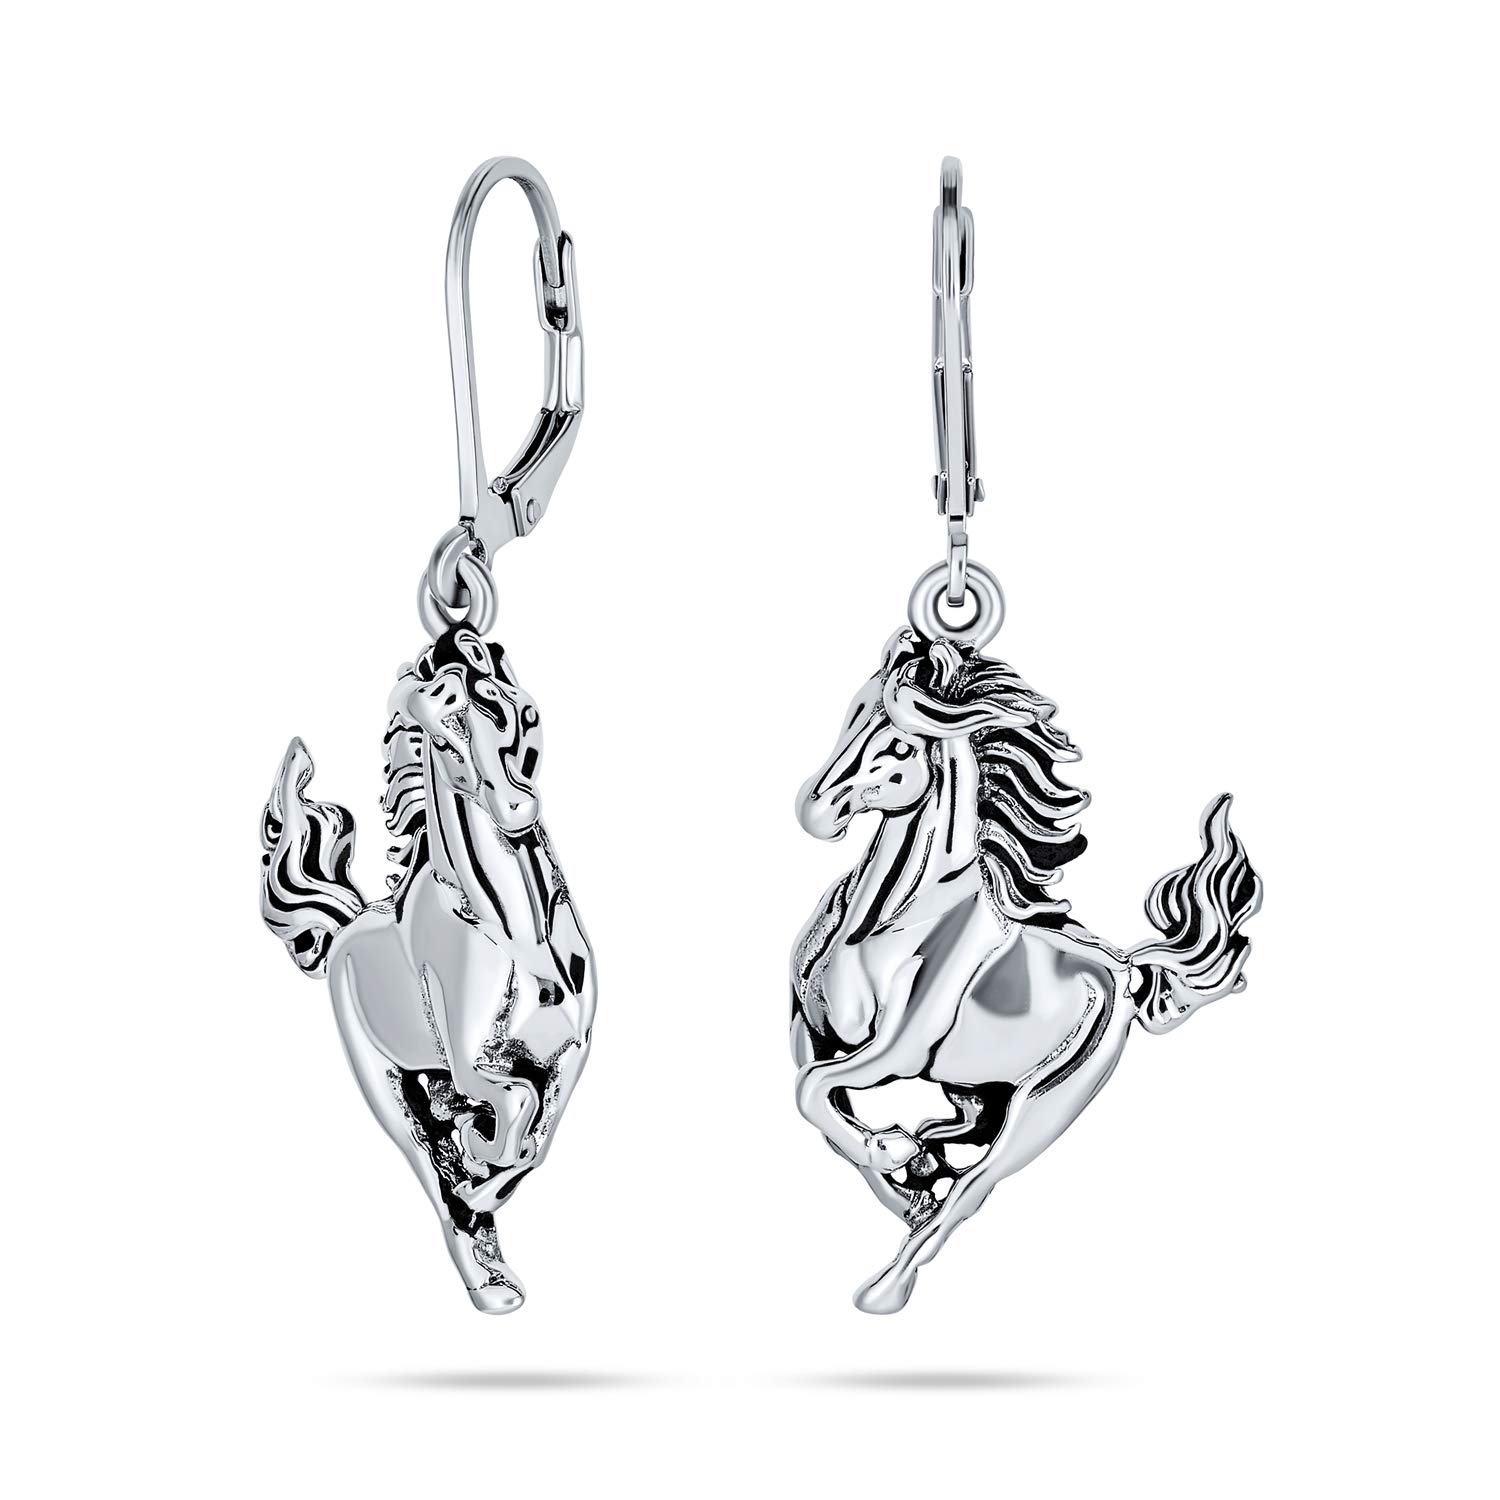 Equestrian Equine Gift Cowgirl Dangle Galloping Horse Earrings Western Jewelry For Women Teen .925 Sterling Silver Lever back